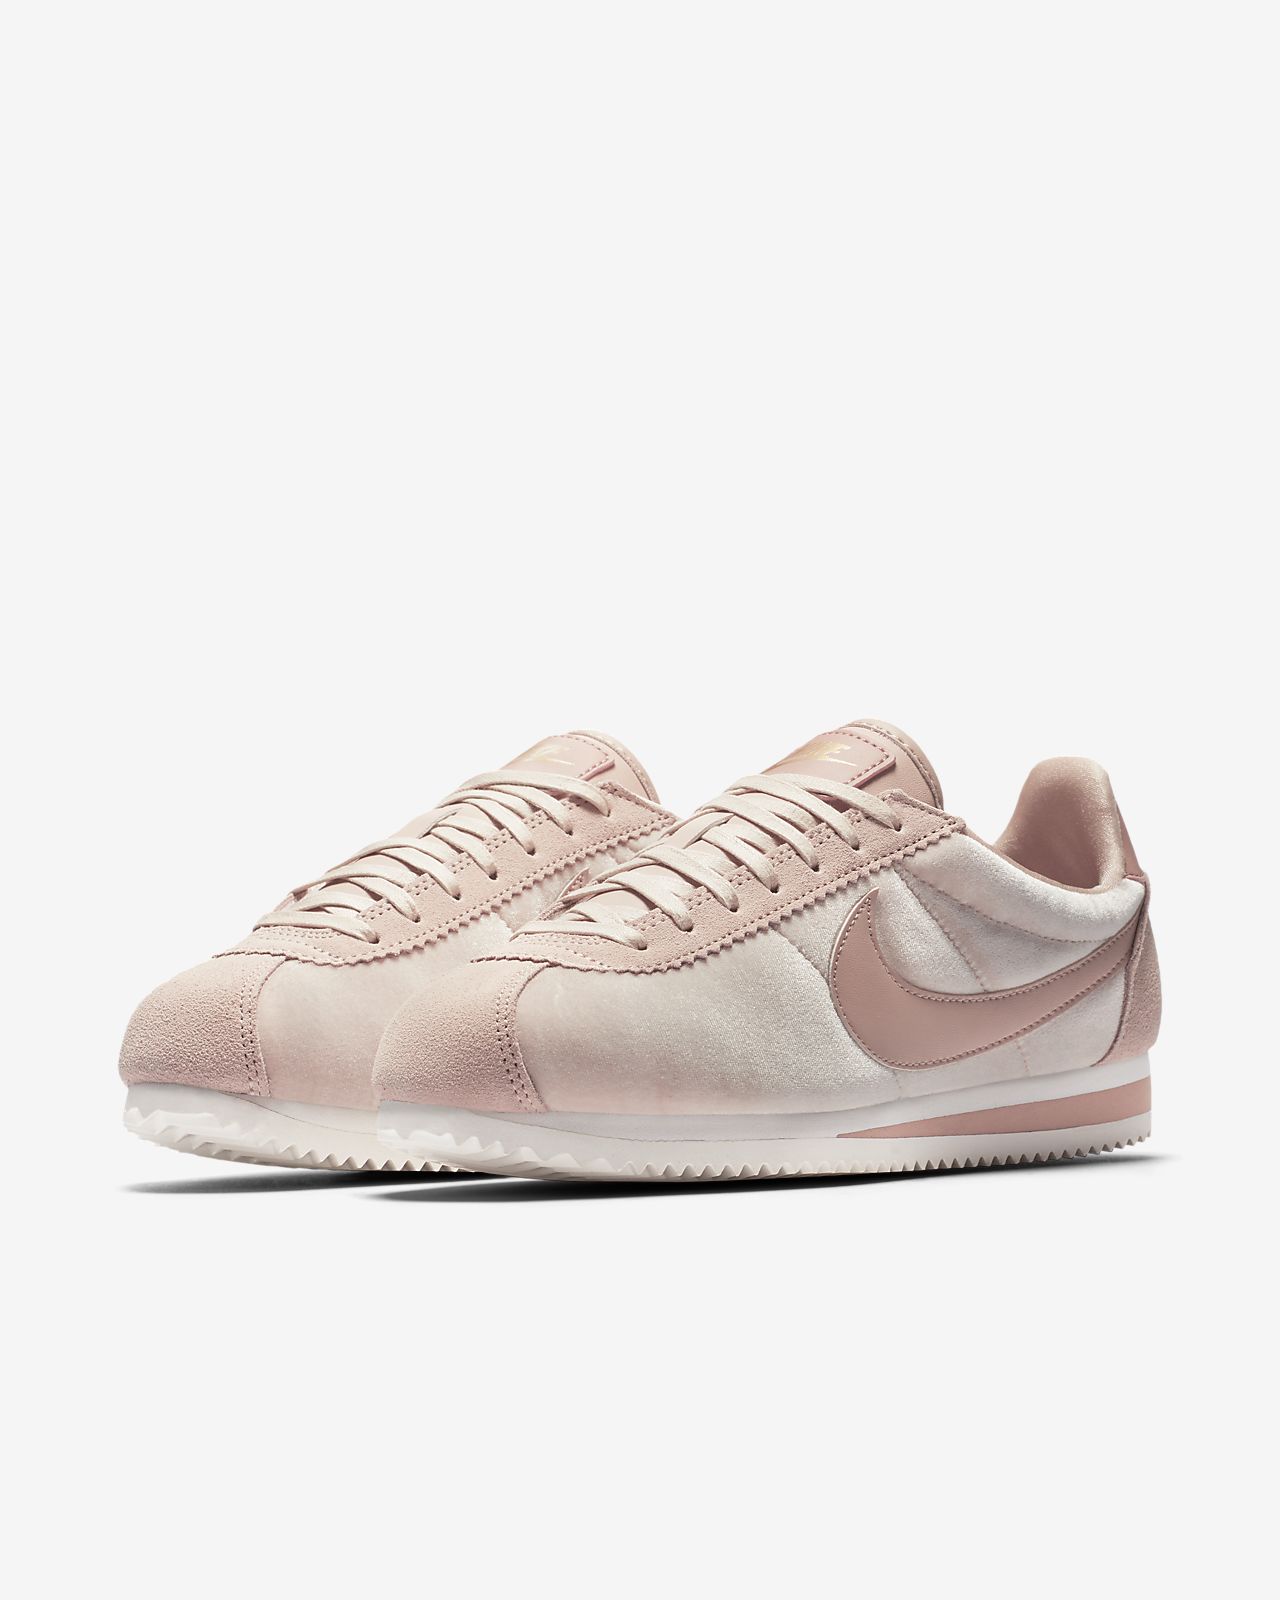 nike beige with gold swoosh suede cortez se trainers